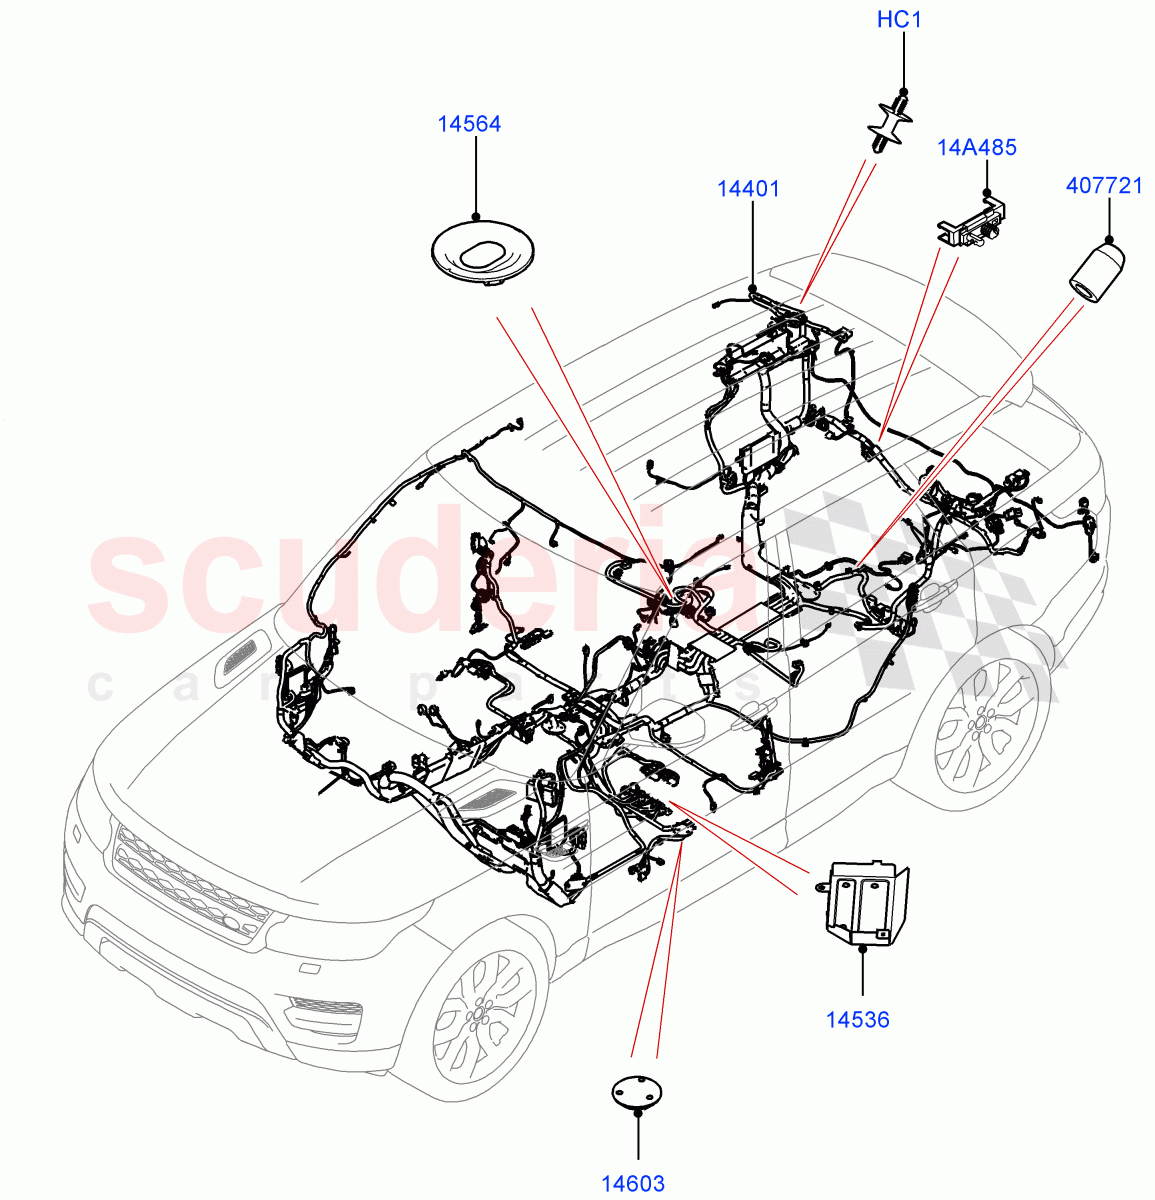 Electrical Wiring - Engine And Dash(Main Harness)((V)TOEA999999) of Land Rover Land Rover Range Rover Sport (2014+) [3.0 I6 Turbo Diesel AJ20D6]